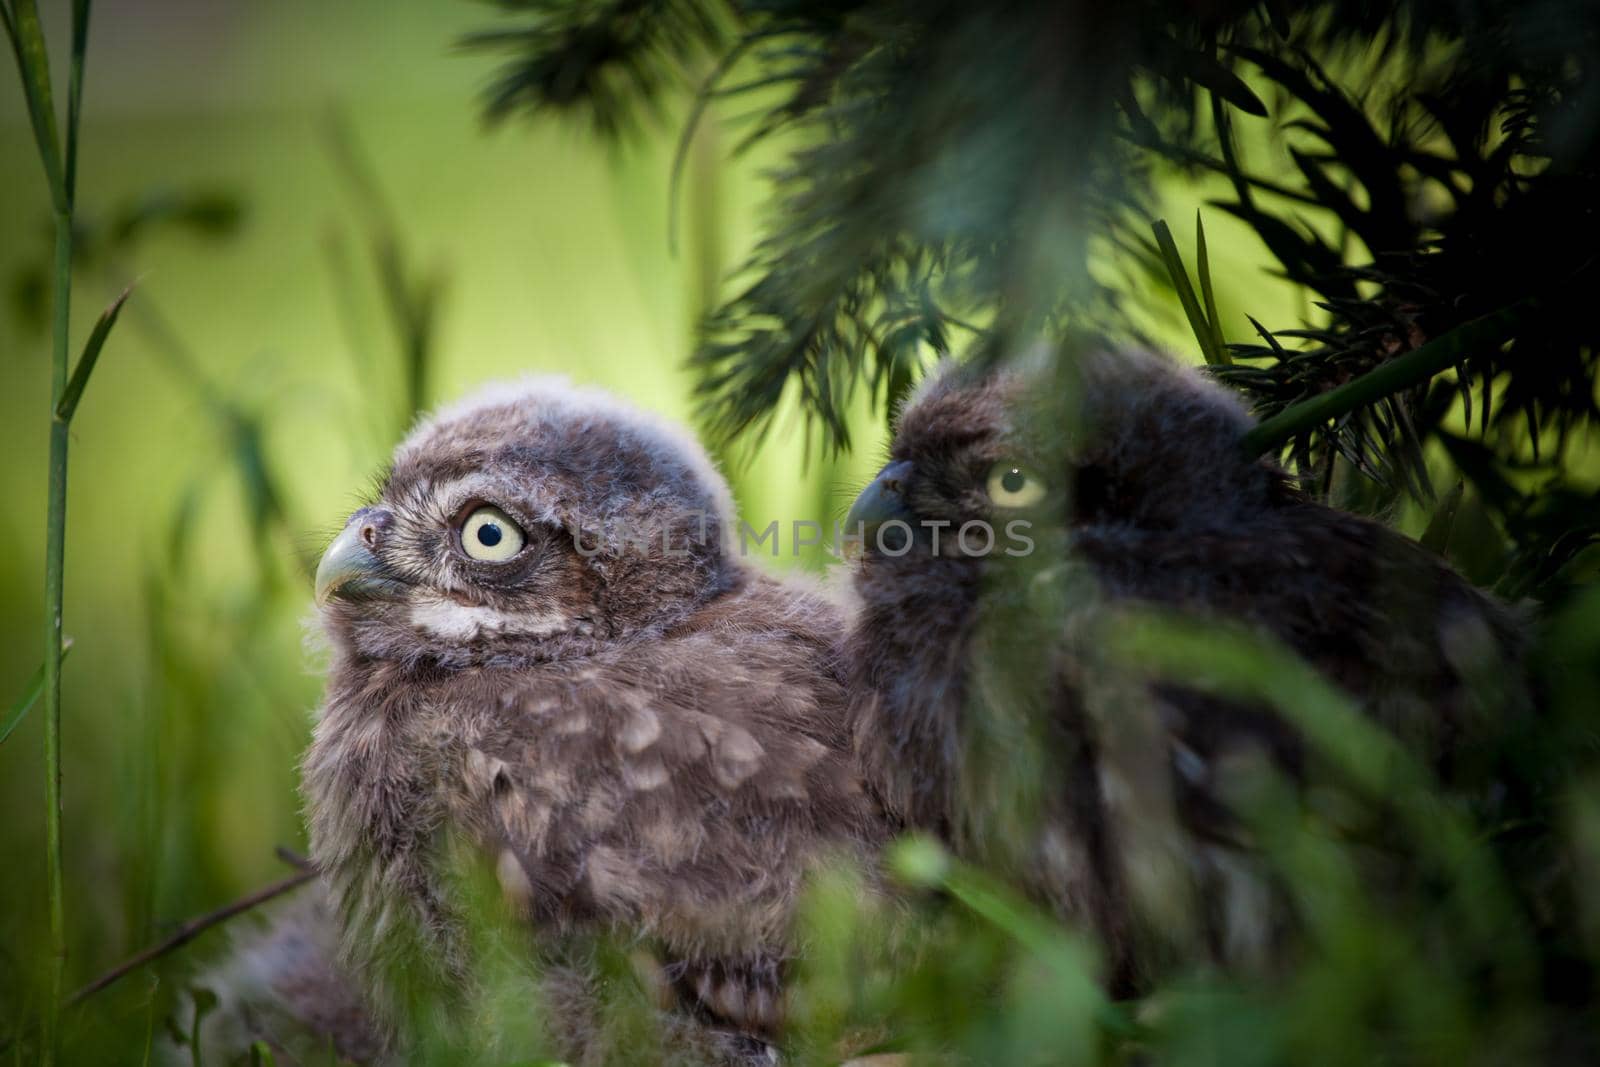 Little Owl Baby, 5 weeks old, Athene noctua on grass